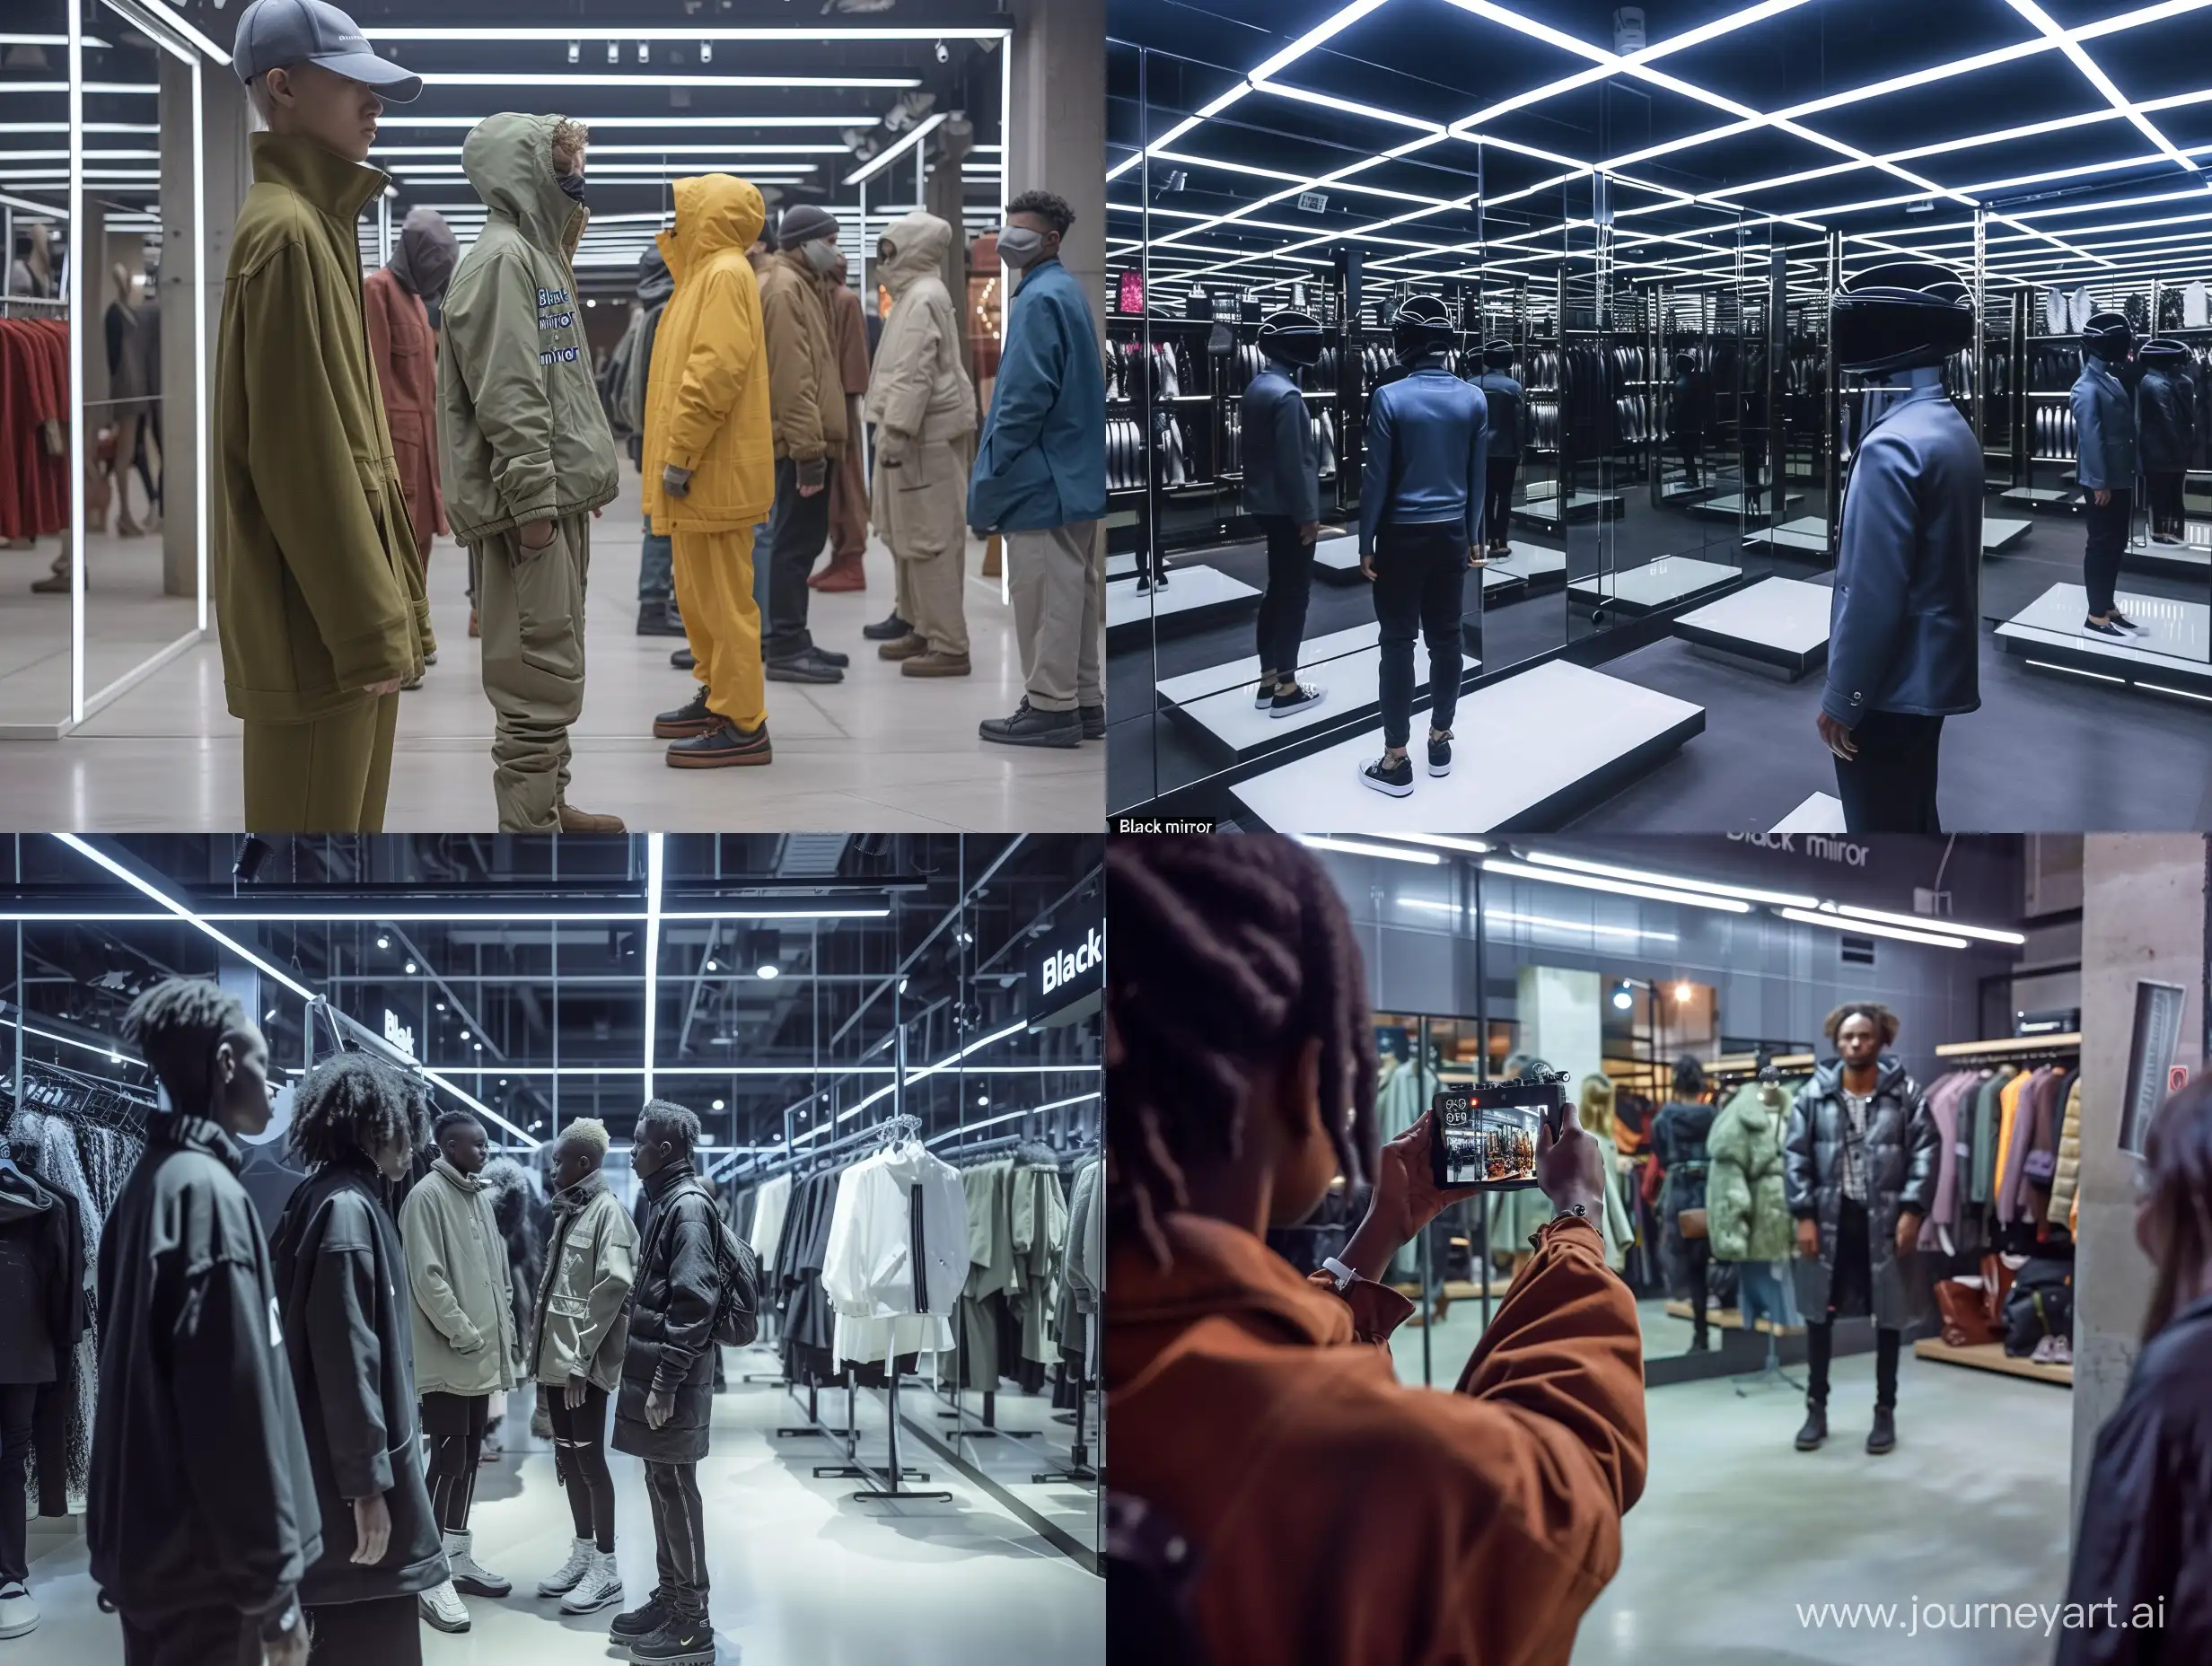 HyperRealistic-Fashion-Store-Collaboration-Scene-Inspired-by-Black-Mirror-Series